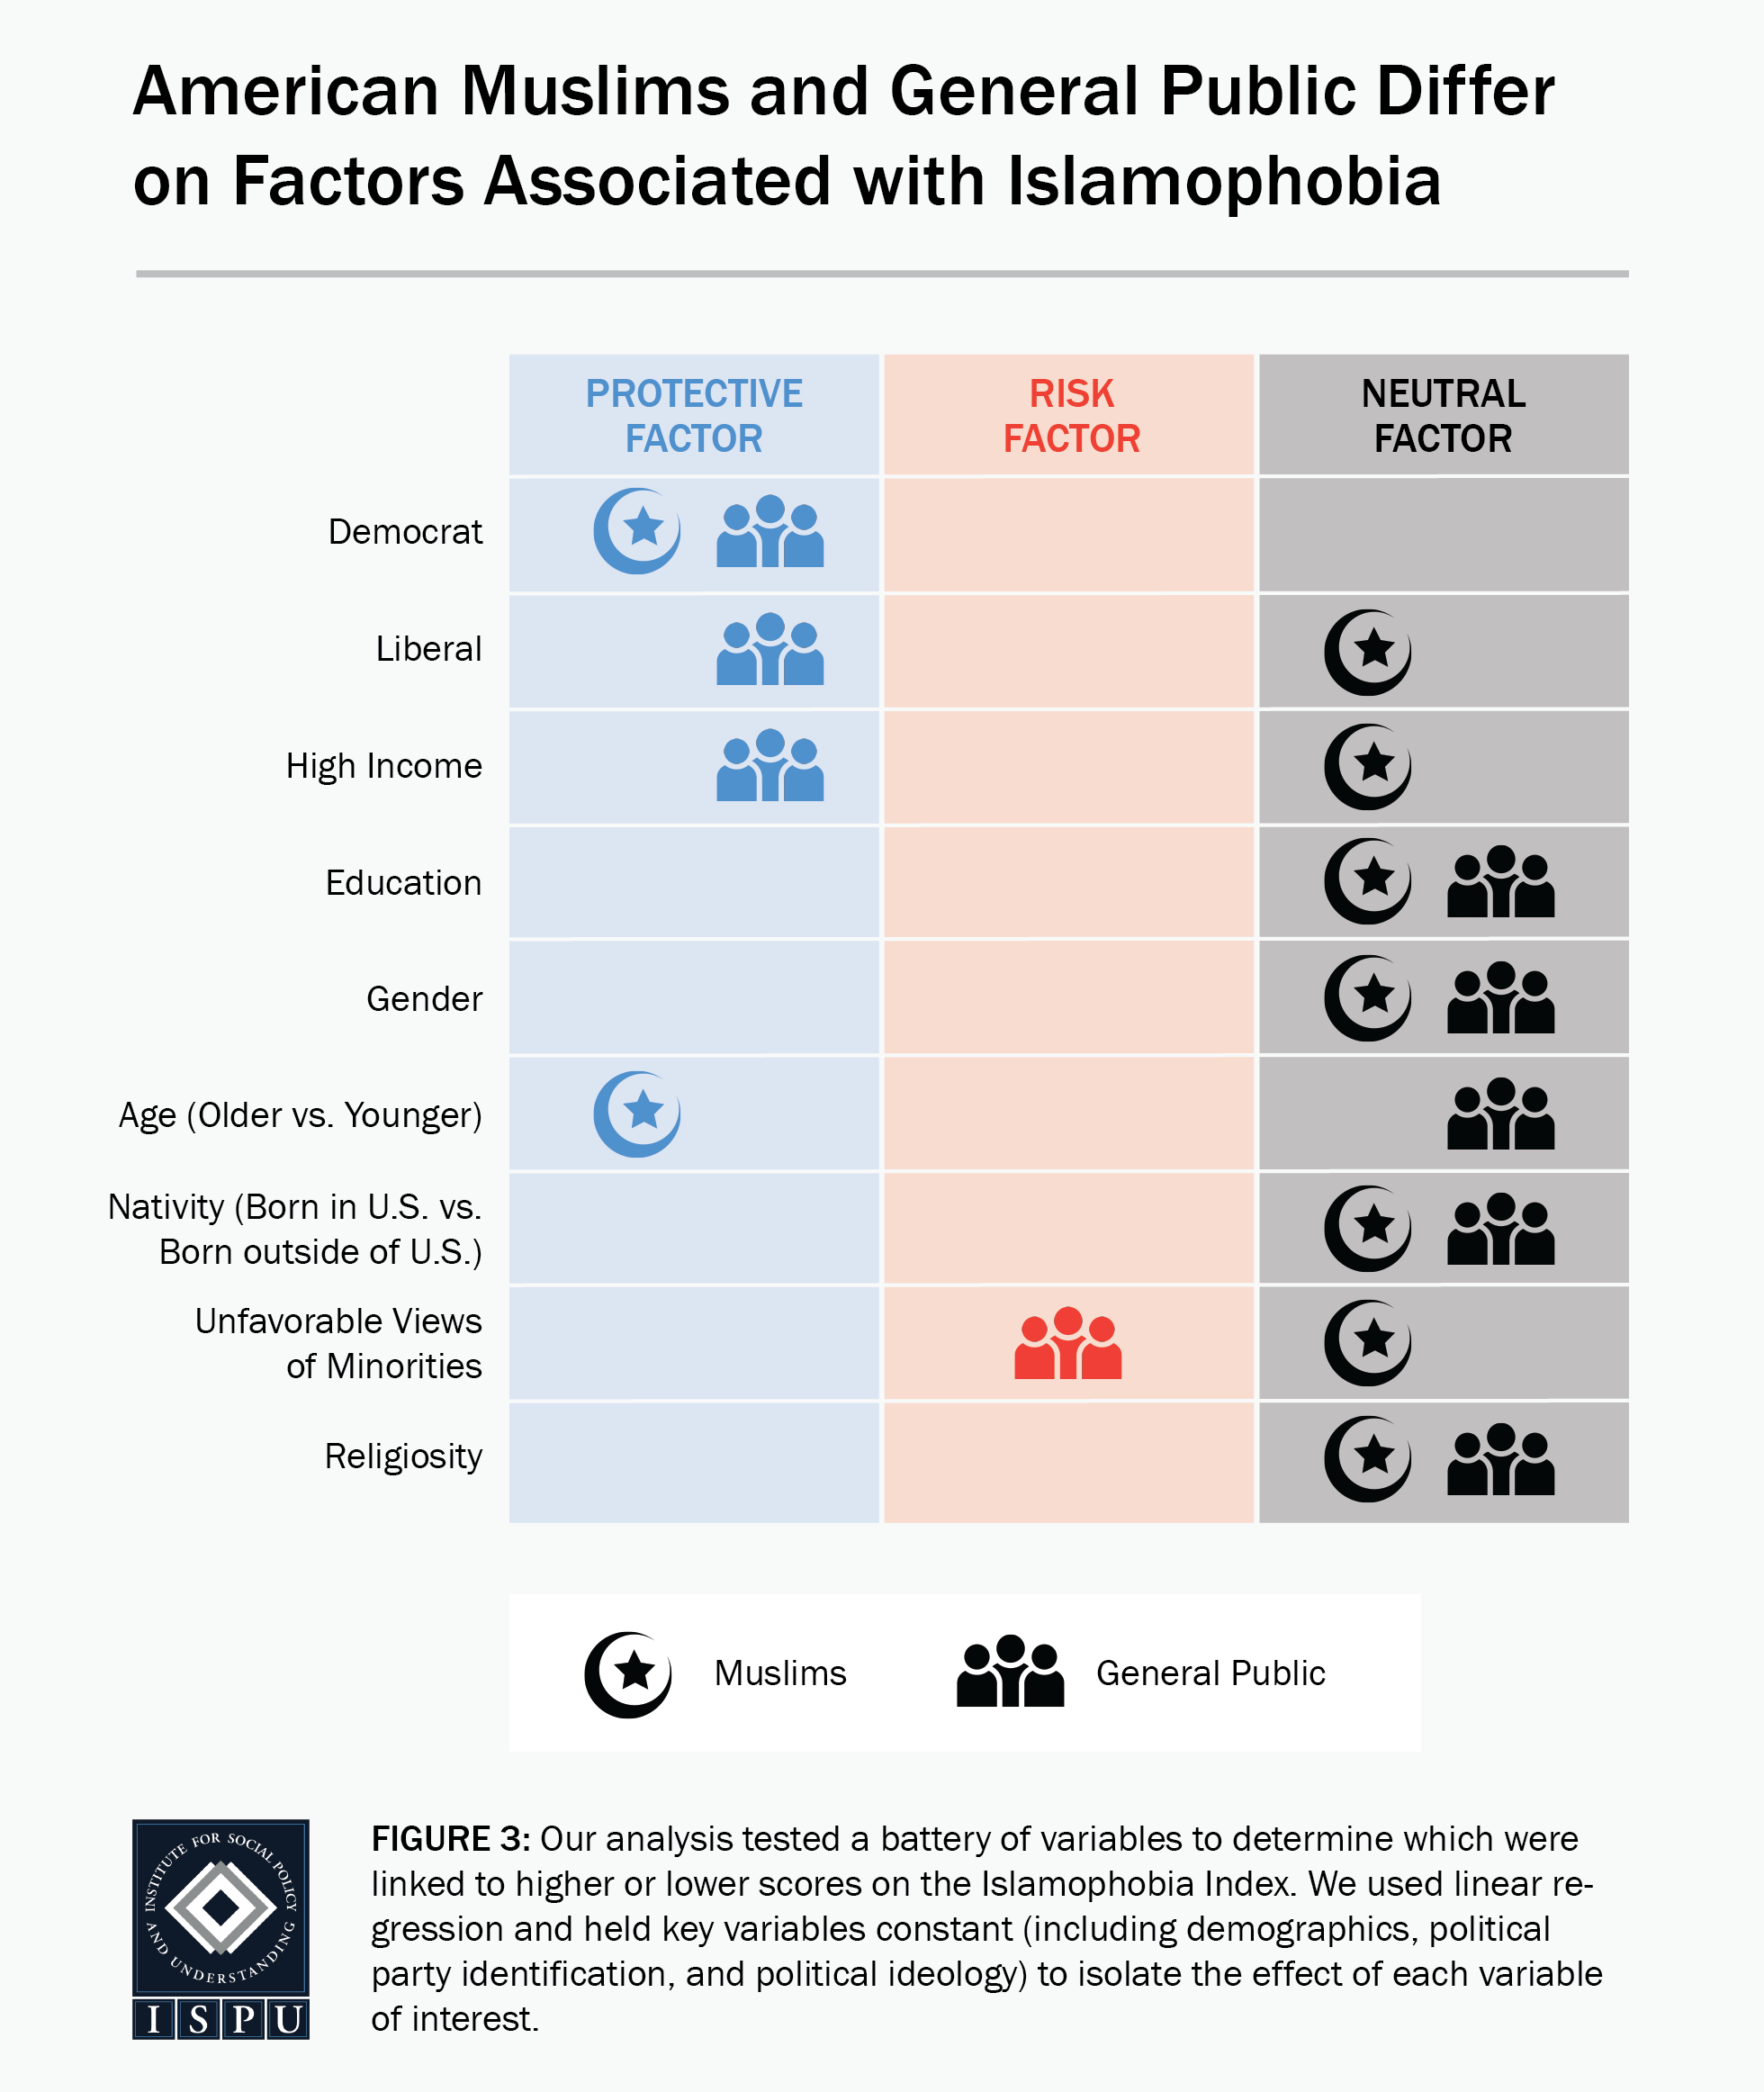 Figure 3: A table showing that American Muslims and the general public differ on factors associated with Islamophobia